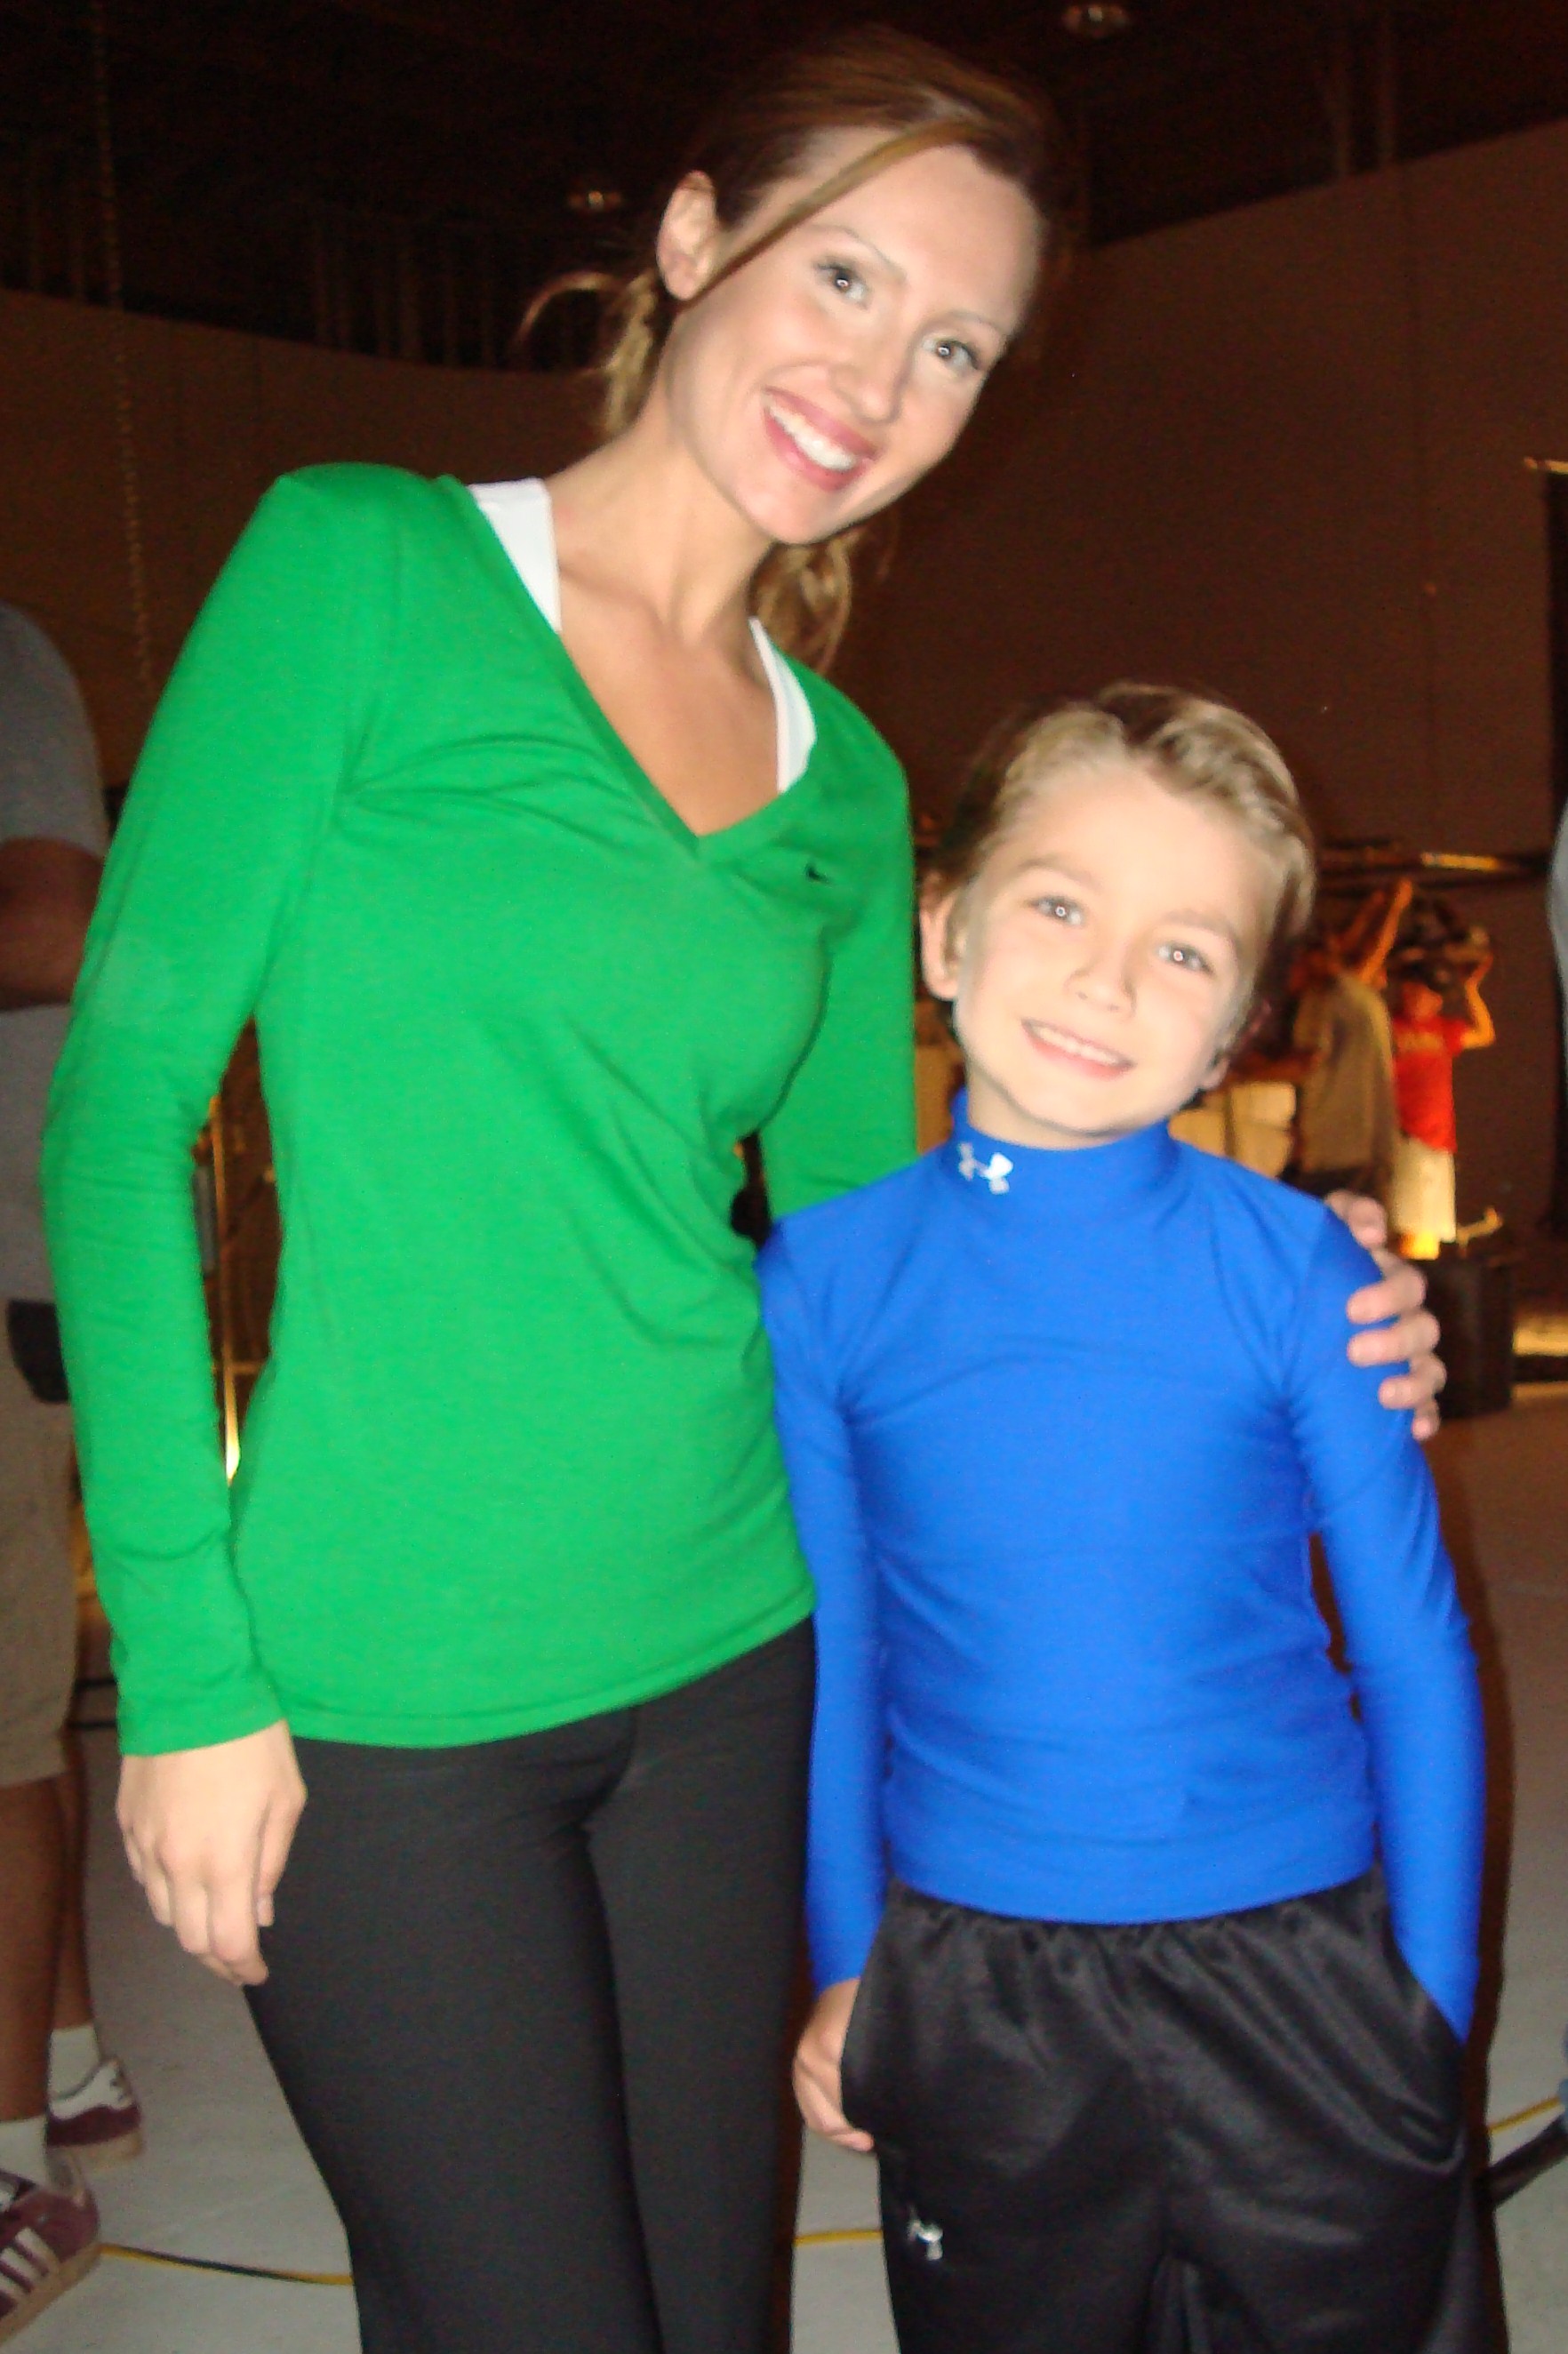 Weston McClelland and friend, actress, Ms. Meaghan Cooper on-set in Houston, TX.